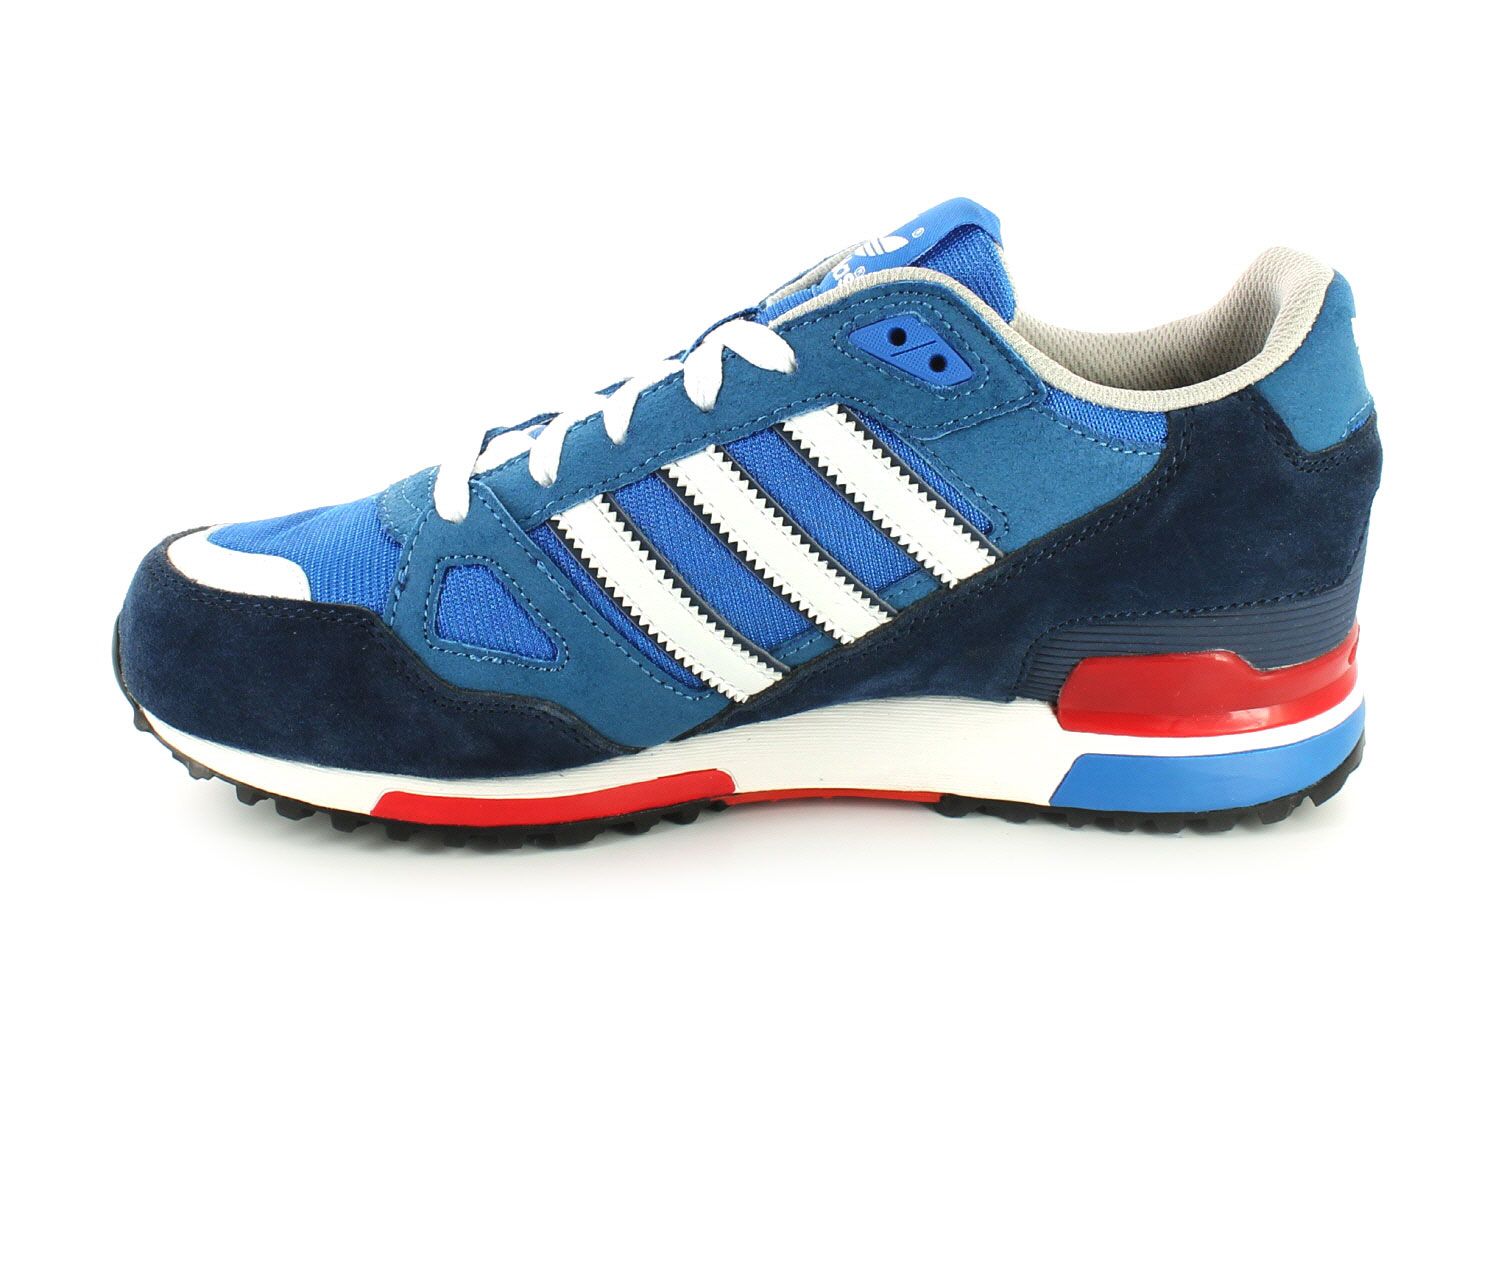 New Mens/Gents Blue/White Adidas Leather Lightweight Running Shoes